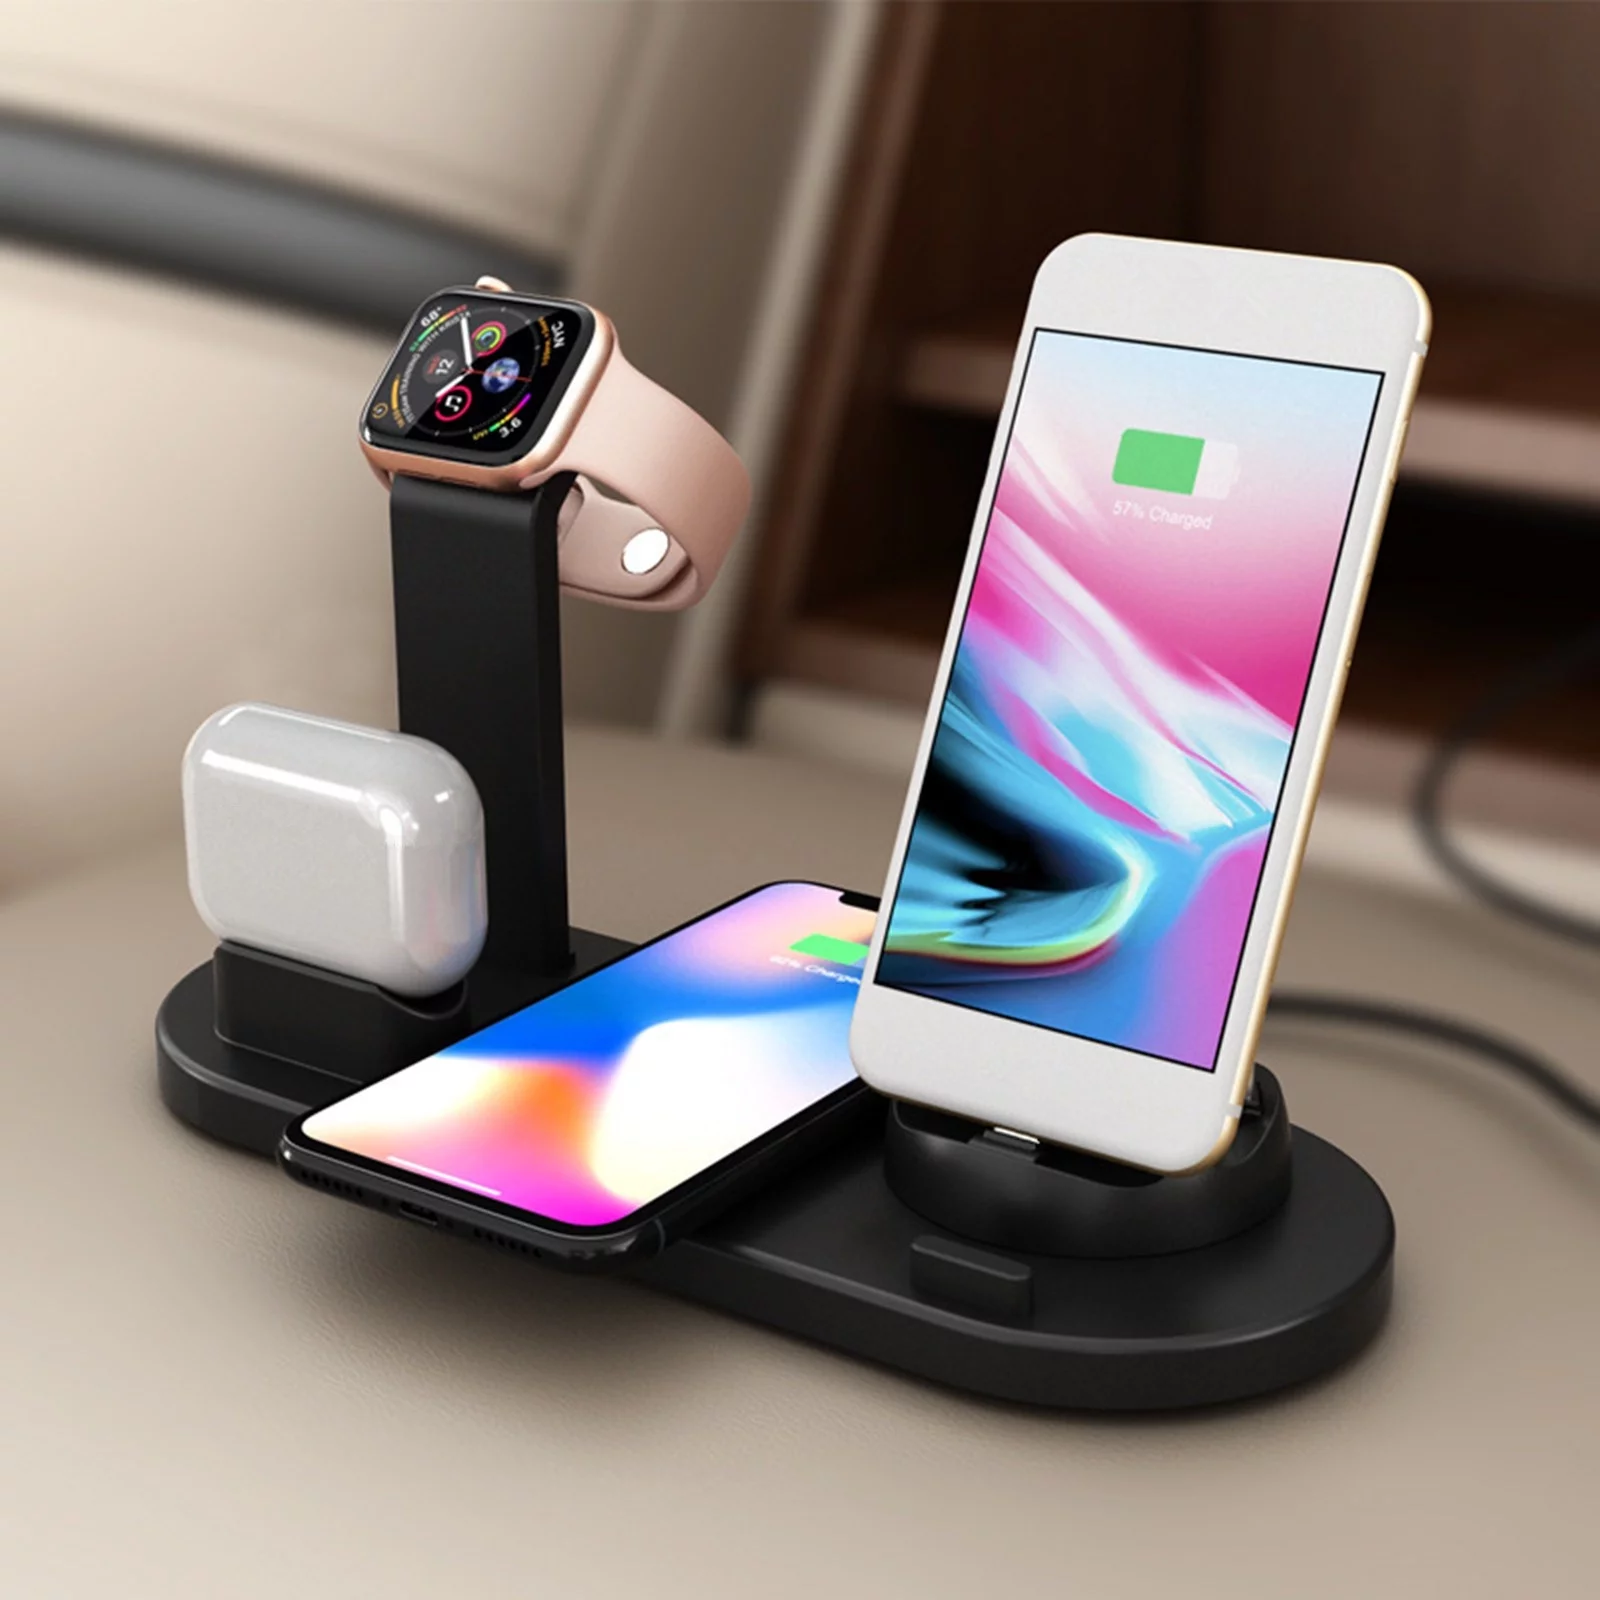 Multi-Function 4 in 1 Wireless Charging Stand - Black image